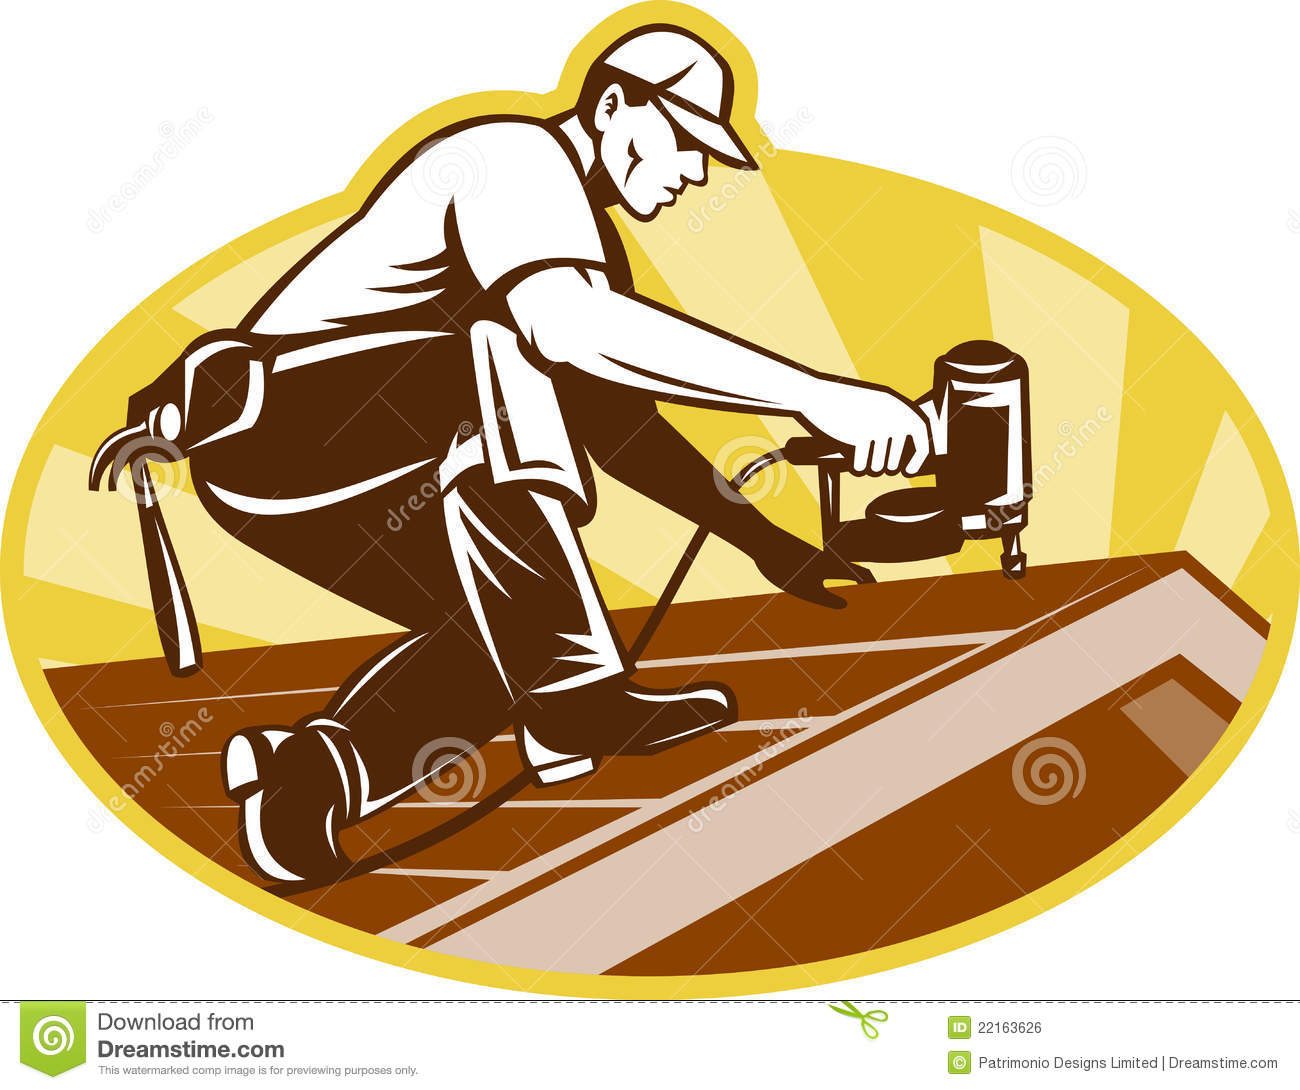 Roofer Roofing Worker Working On Roof Royalty Free Stock Image   Image